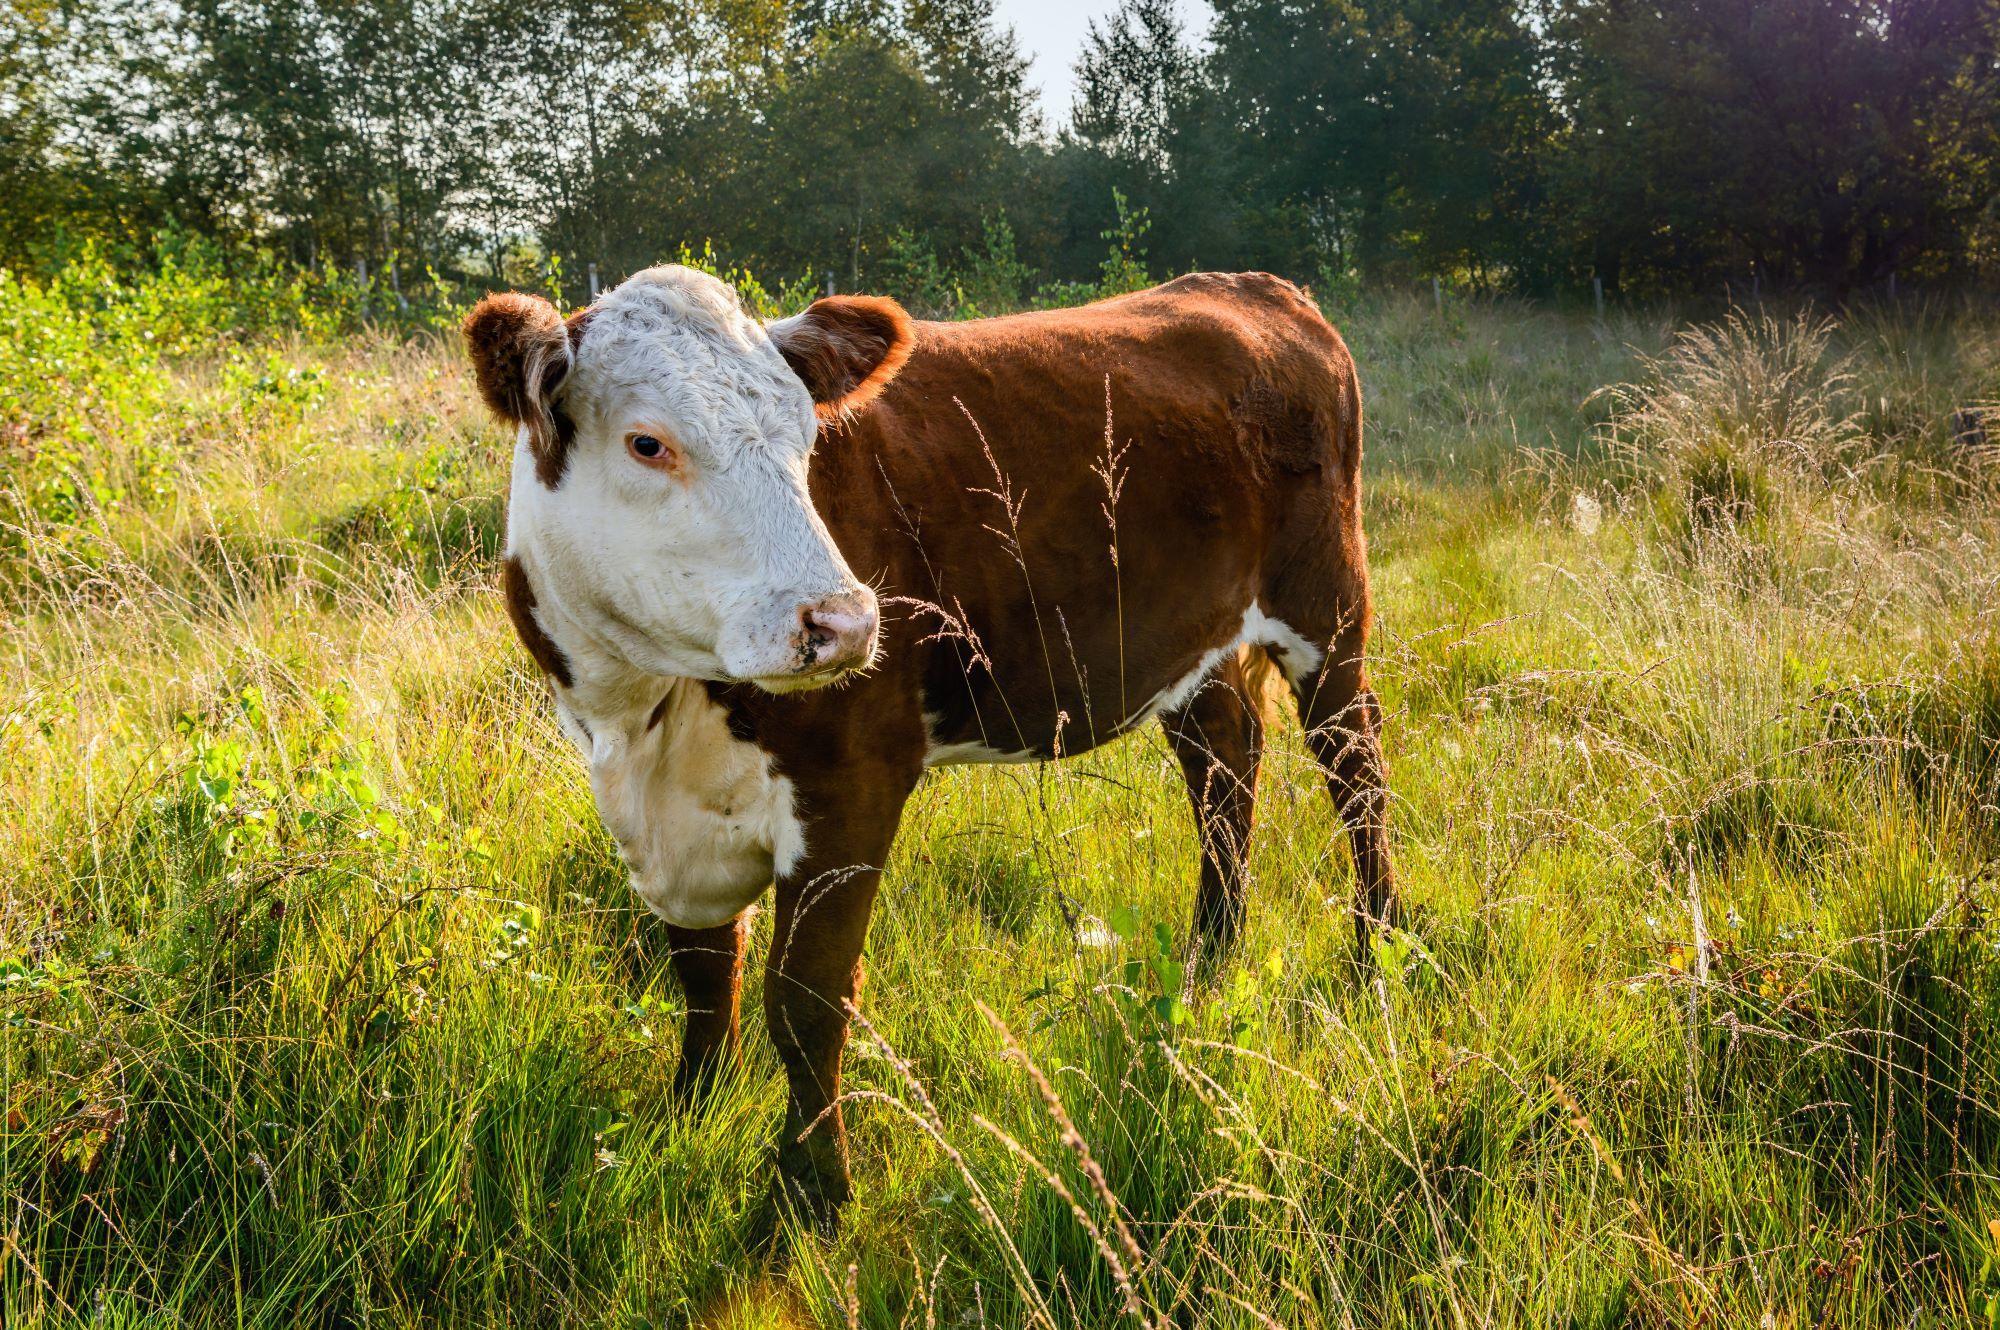 Can one cow contaminate my well water? | OSU Extension Service